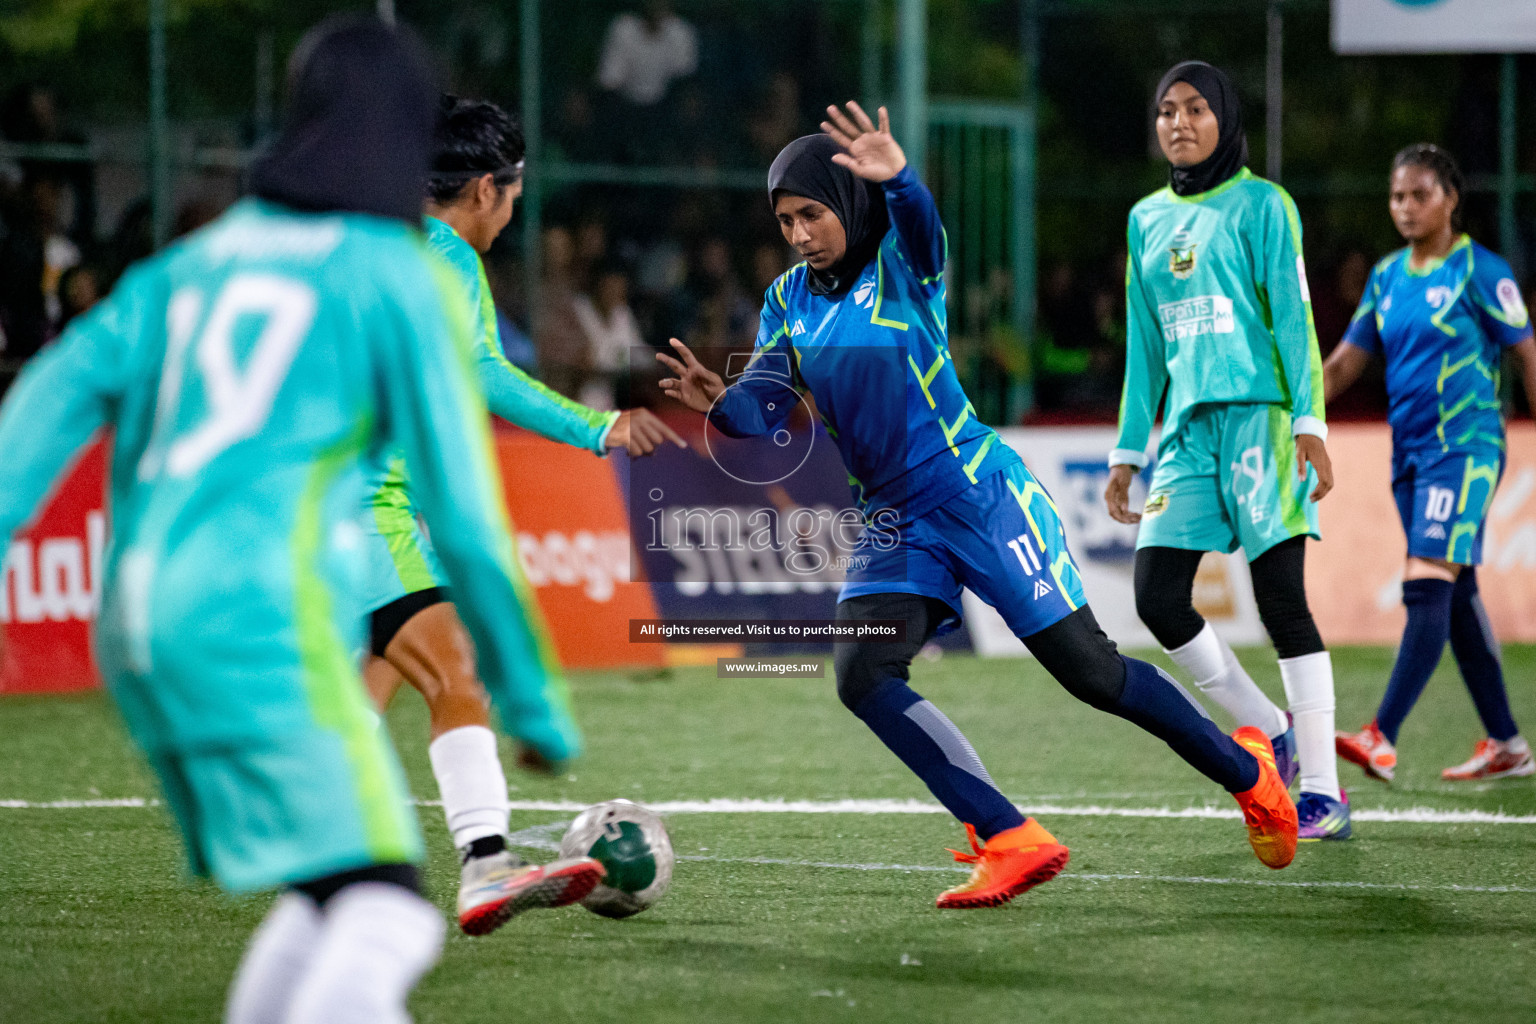 Club WAMCO vs MACL in Final of Eighteen Thirty 2023 held in Hulhumale, Maldives, on Wednesday, 23rd August 2023.